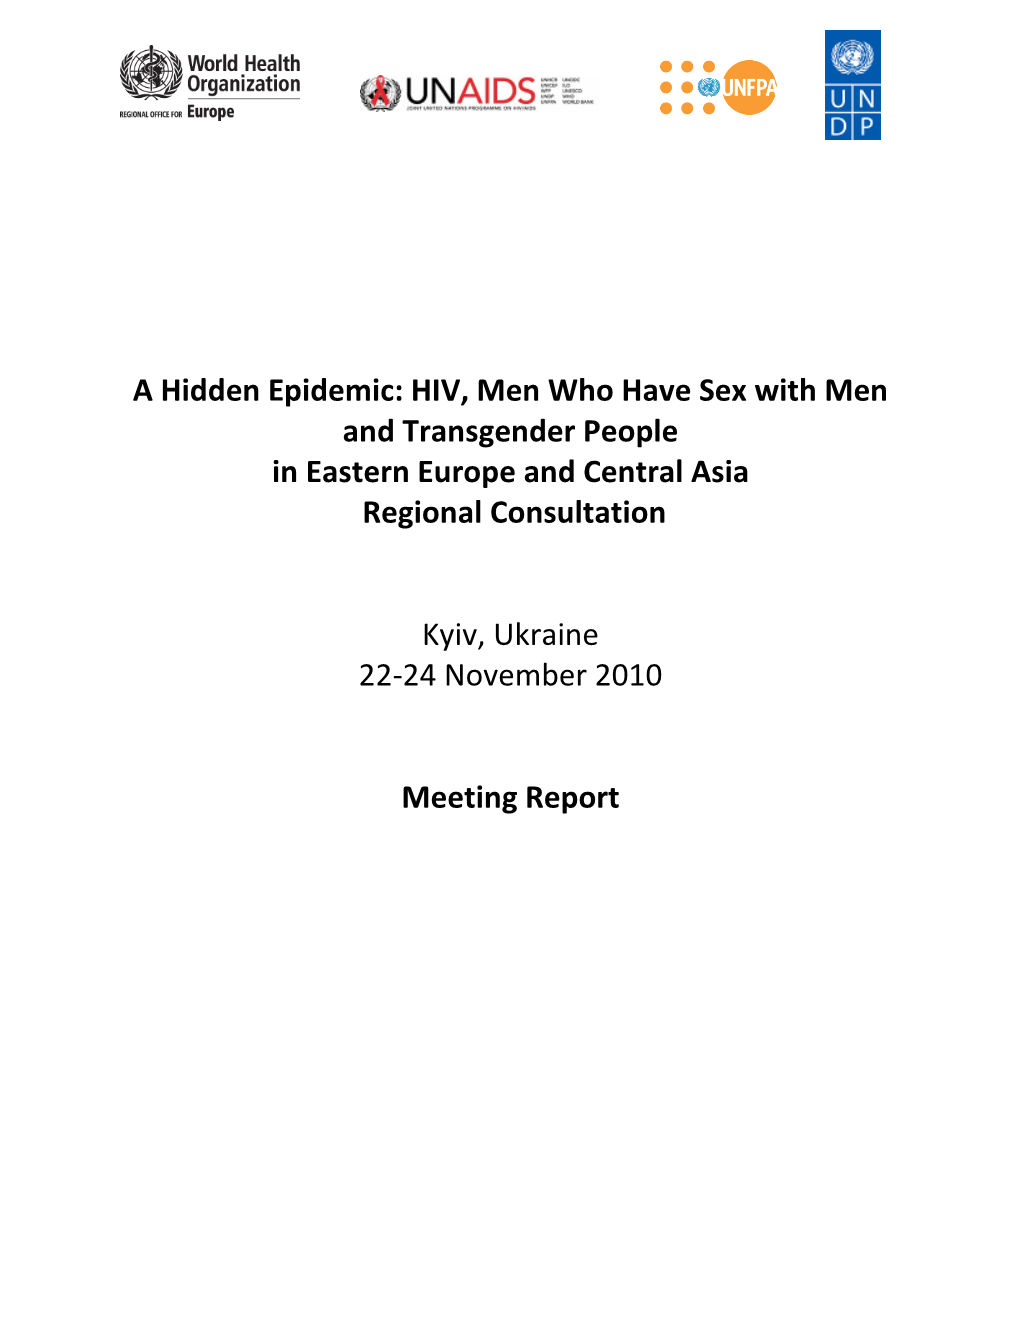 HIV, Men Who Have Sex with Men and Transgender People in Eastern Europe and Central Asia Regional Consultation